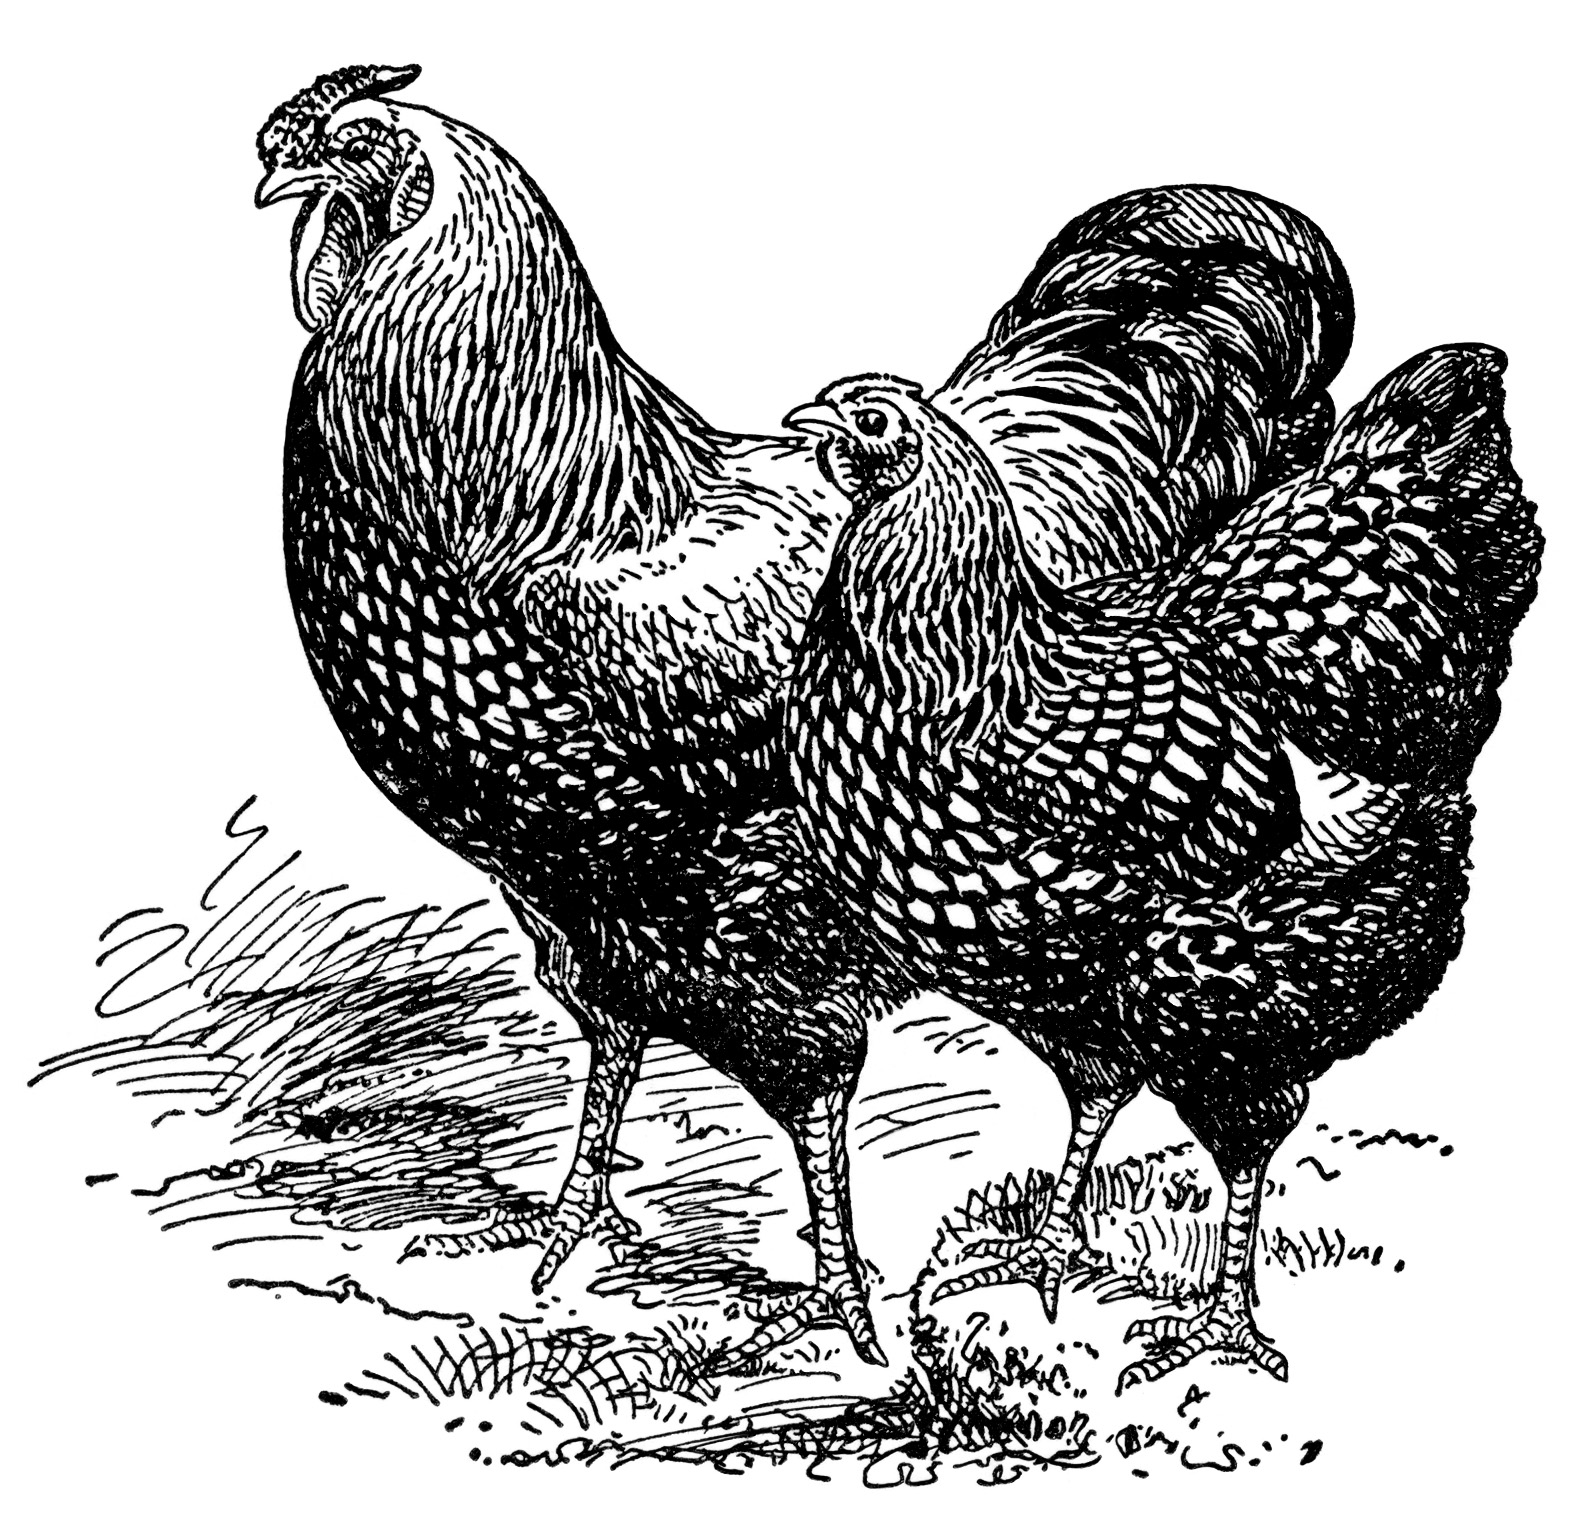 Here is a wonderful vintage clip art image of a hen and rooster. They 